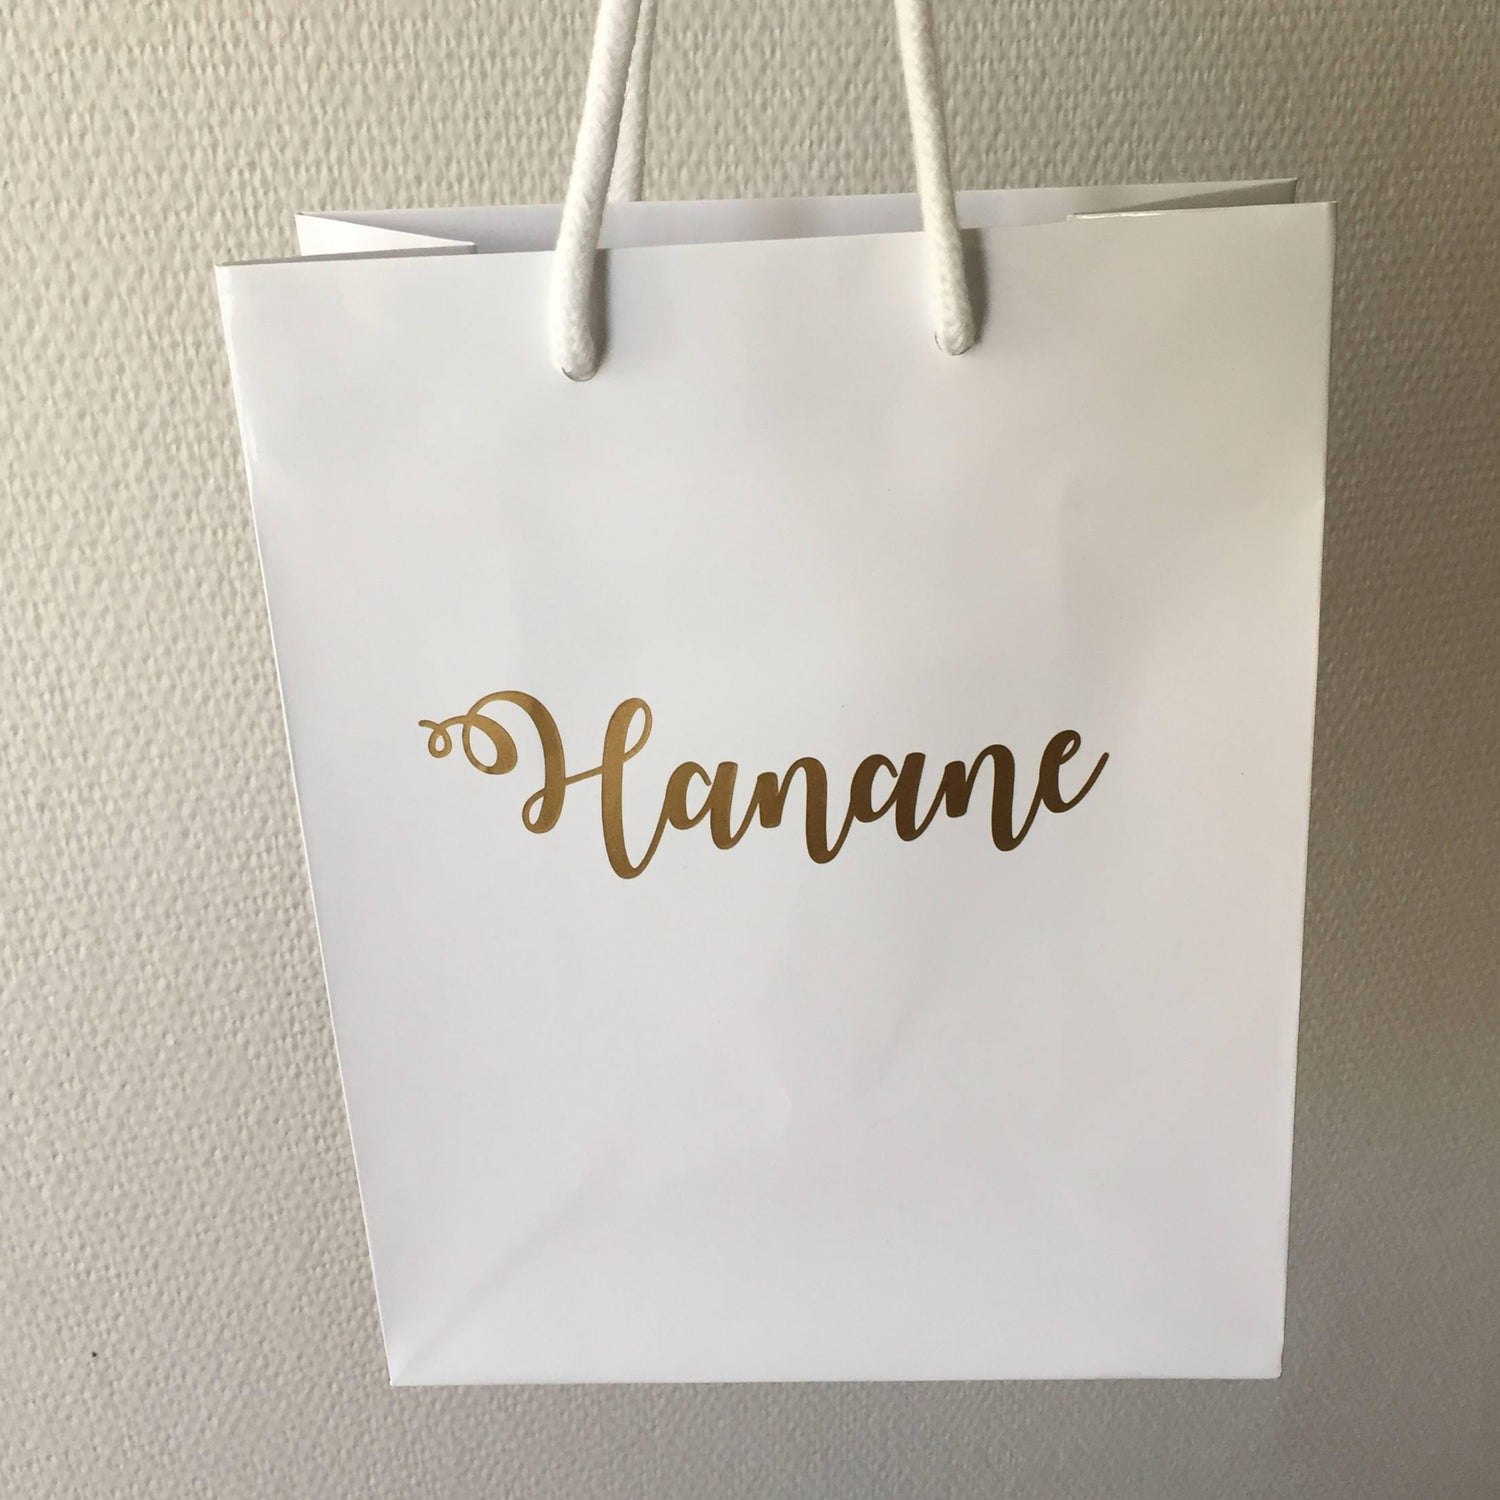 Personalized gift bag (28x12x25cm) - Unique Tasbihs & Gifts